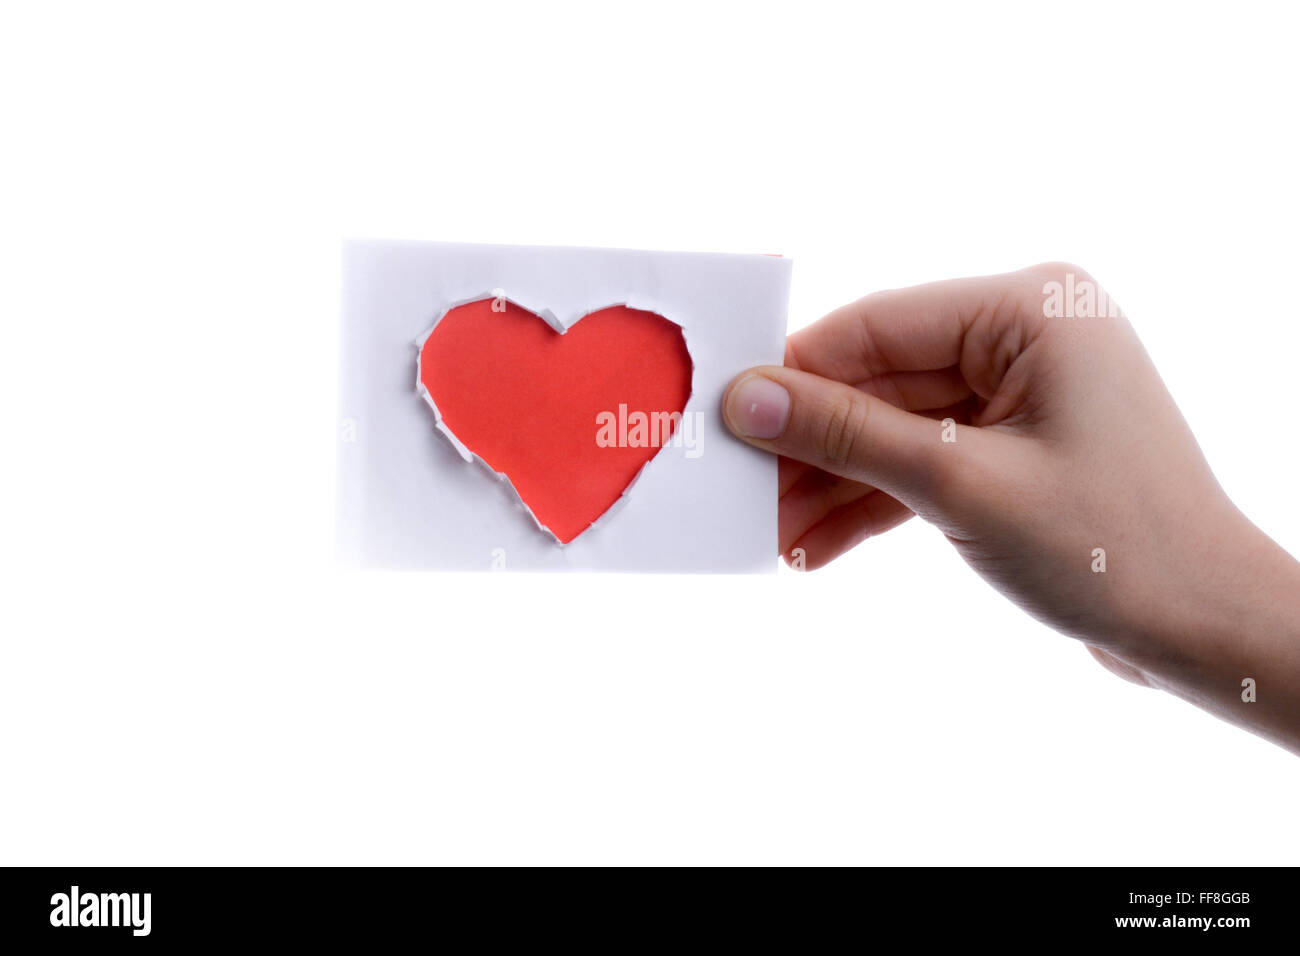 Hand holding a heart shaped paper Stock Photo